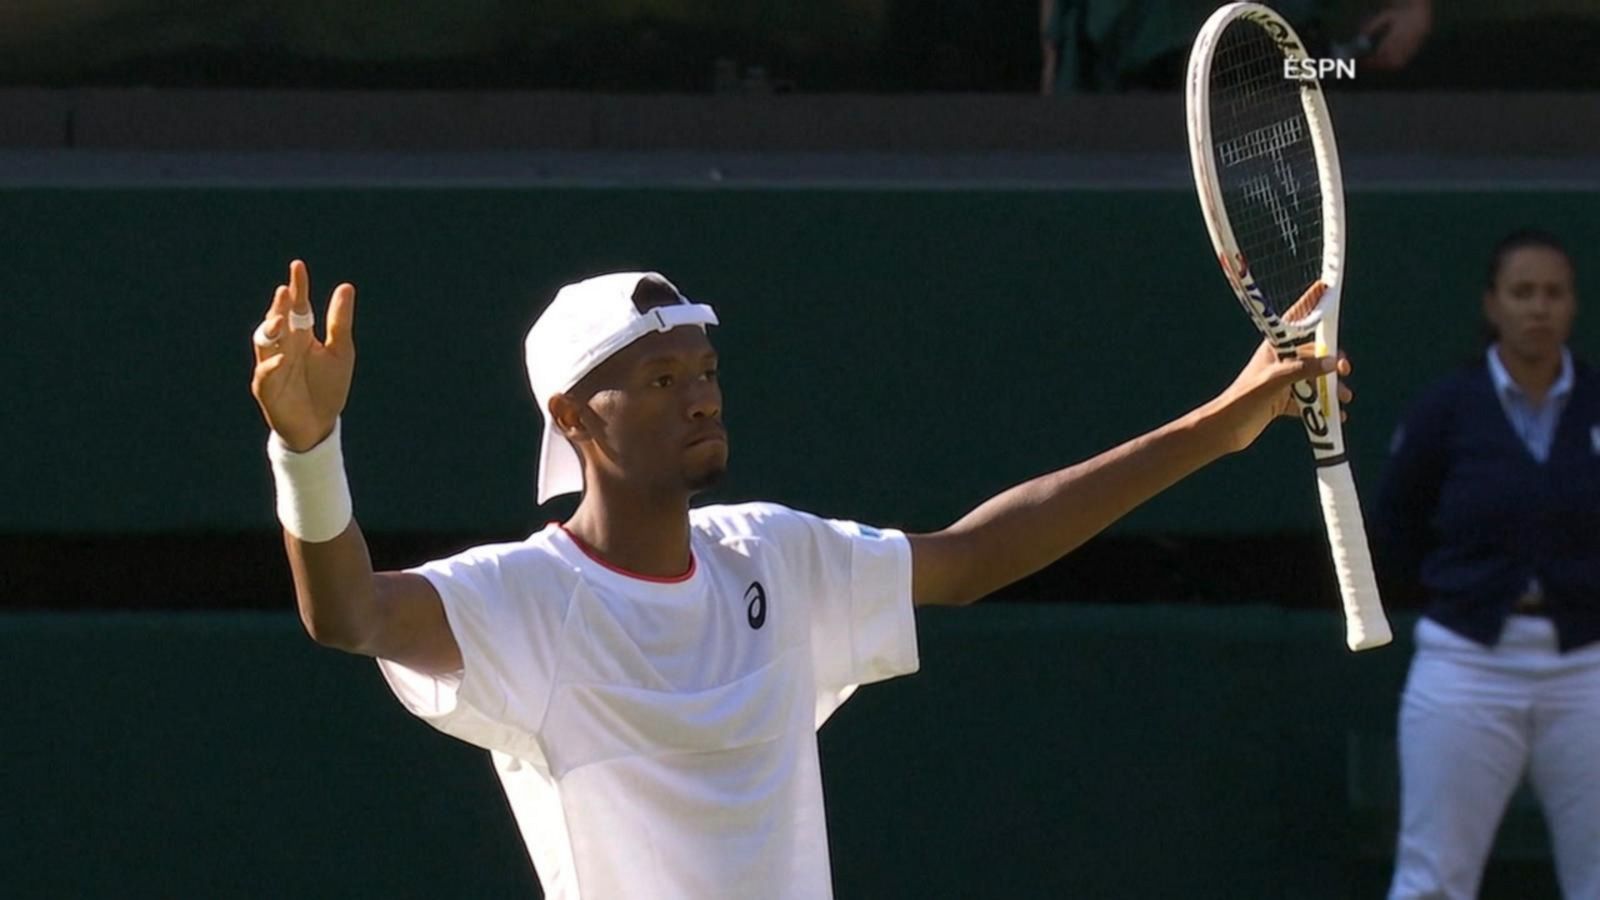 Meet the 27-year-old American taking over Wimbledon